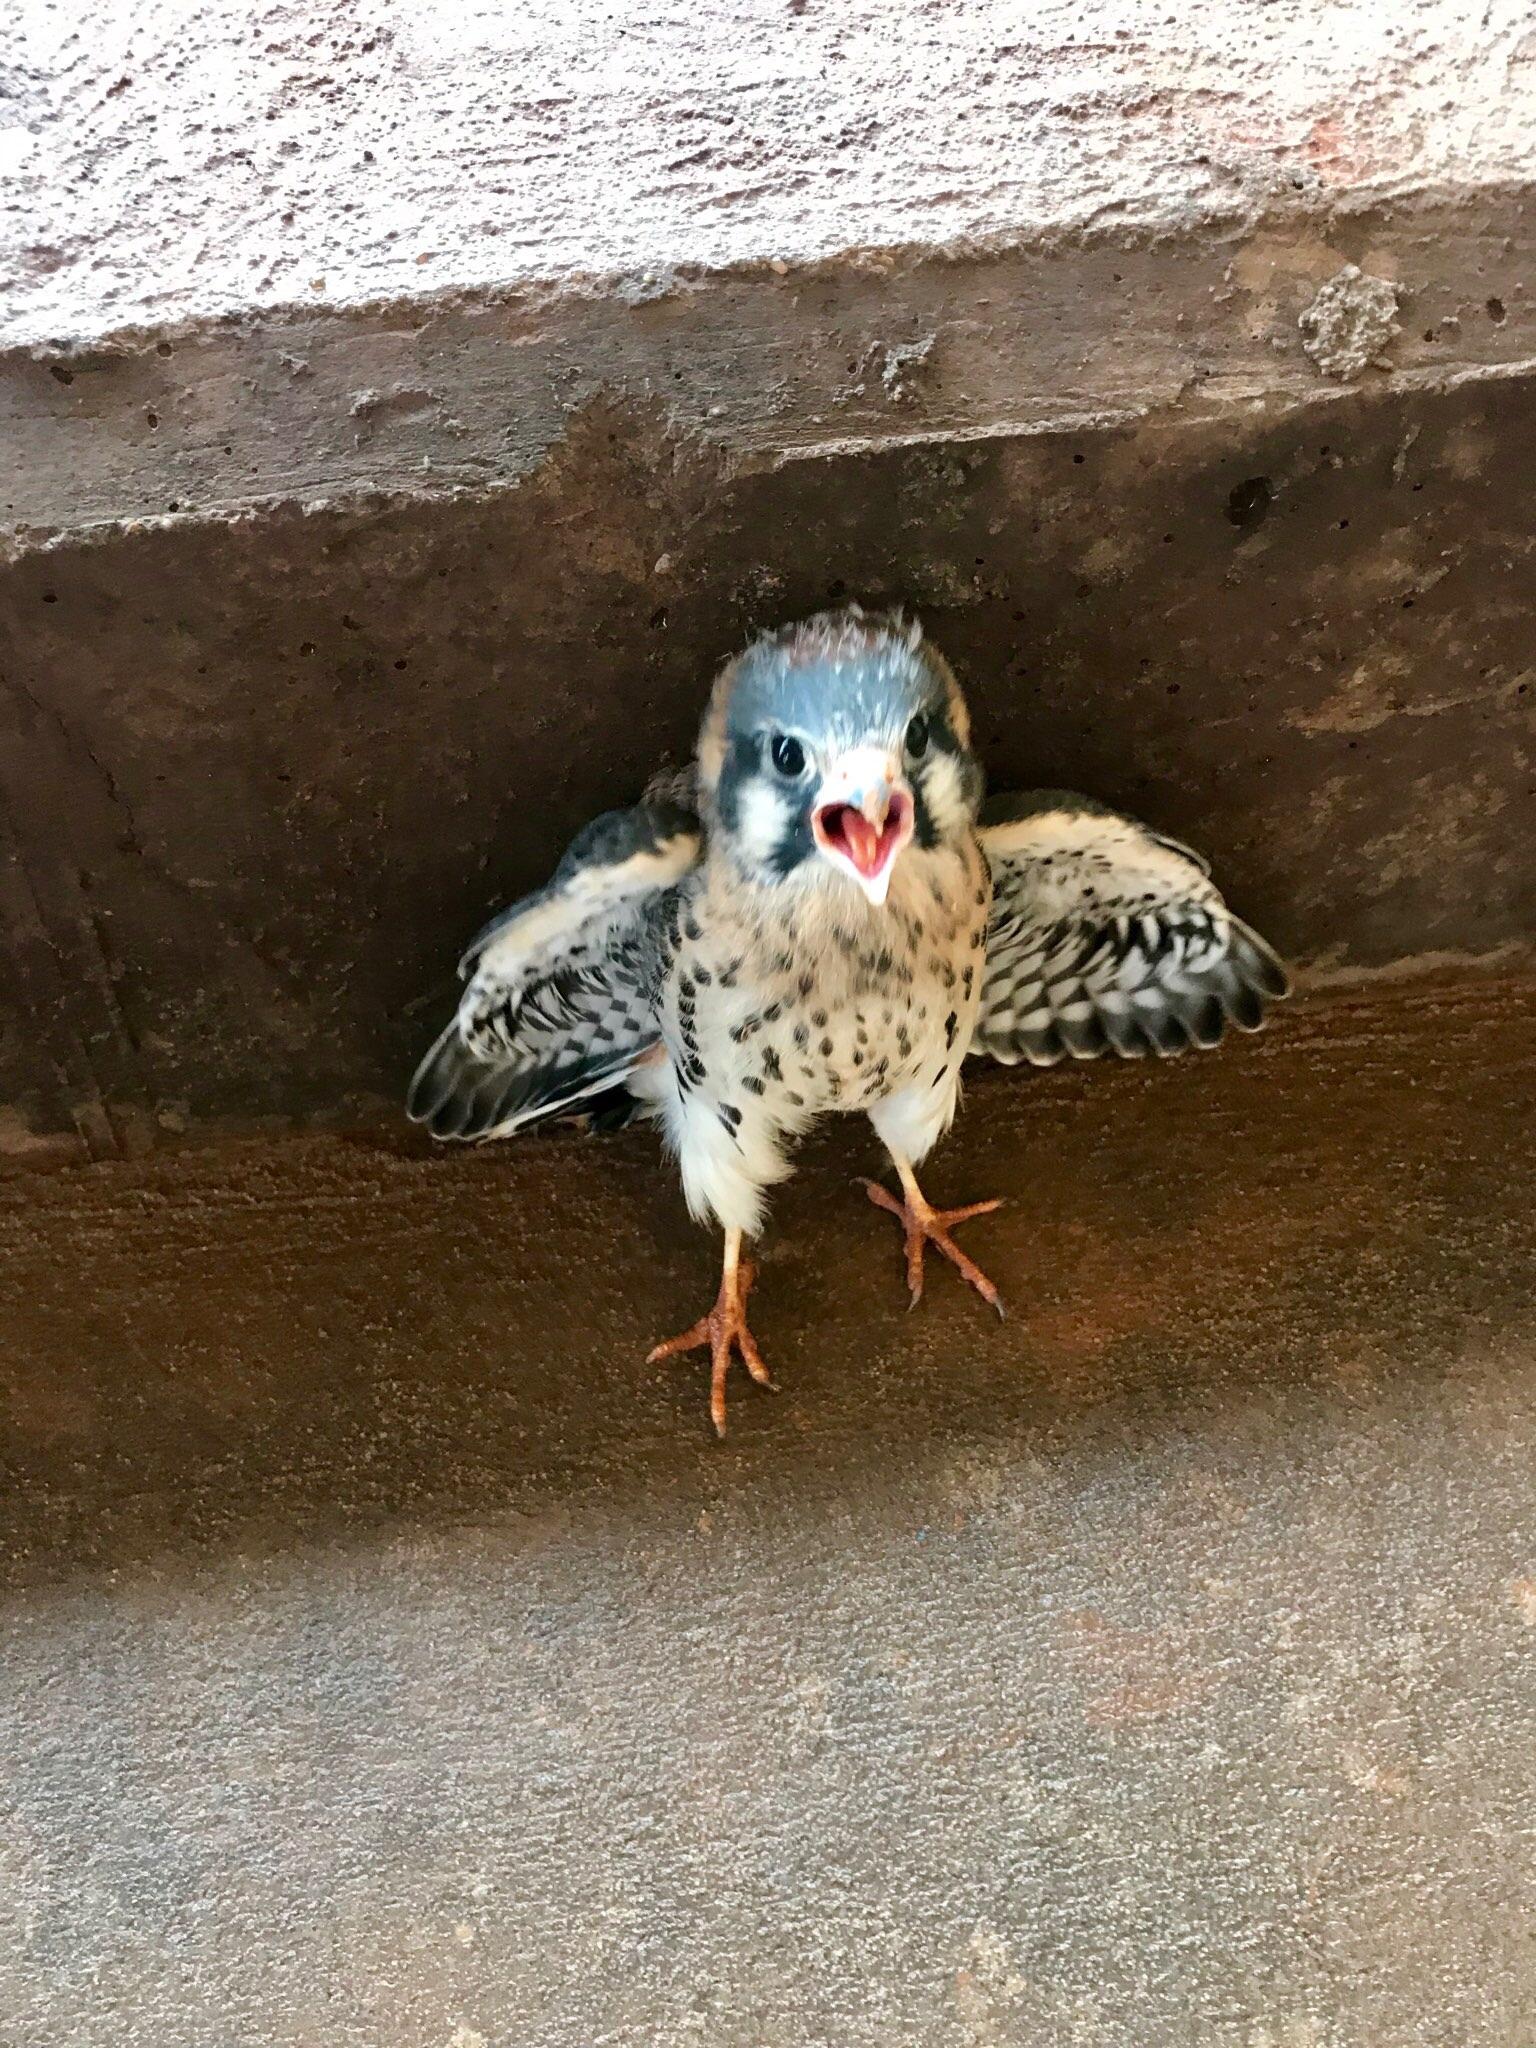 Found a baby hawk! He's so angry...